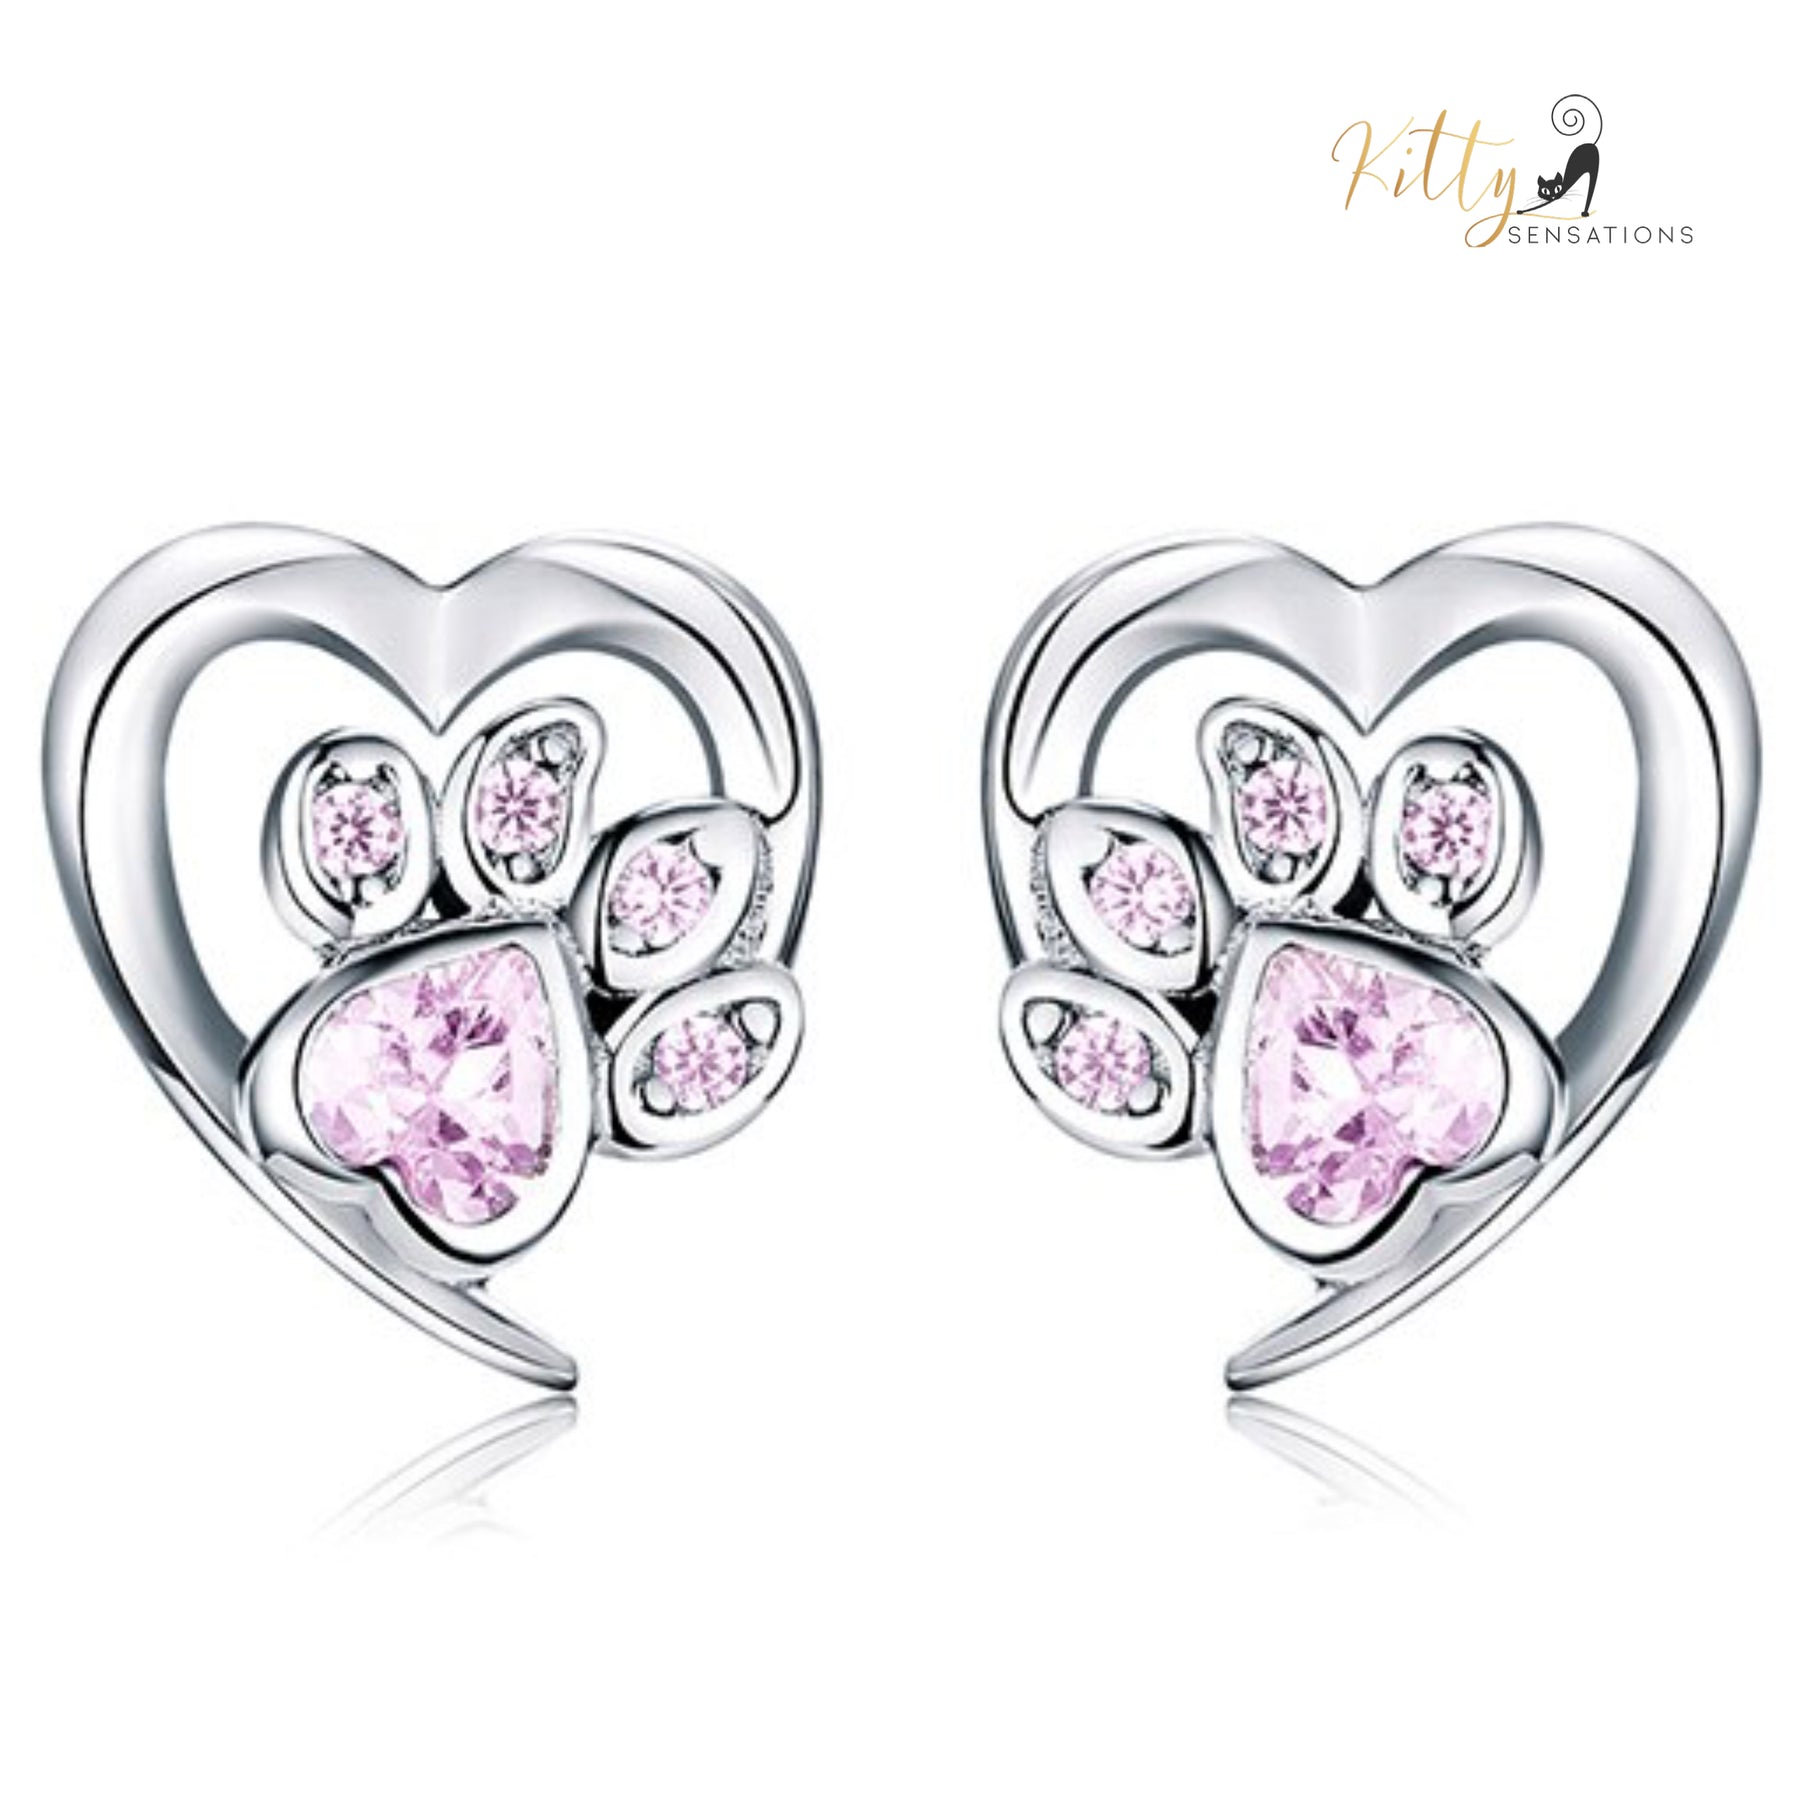 Heart Paw Cat Earrings in Solid 925 Sterling Silver (Platinum Plated)